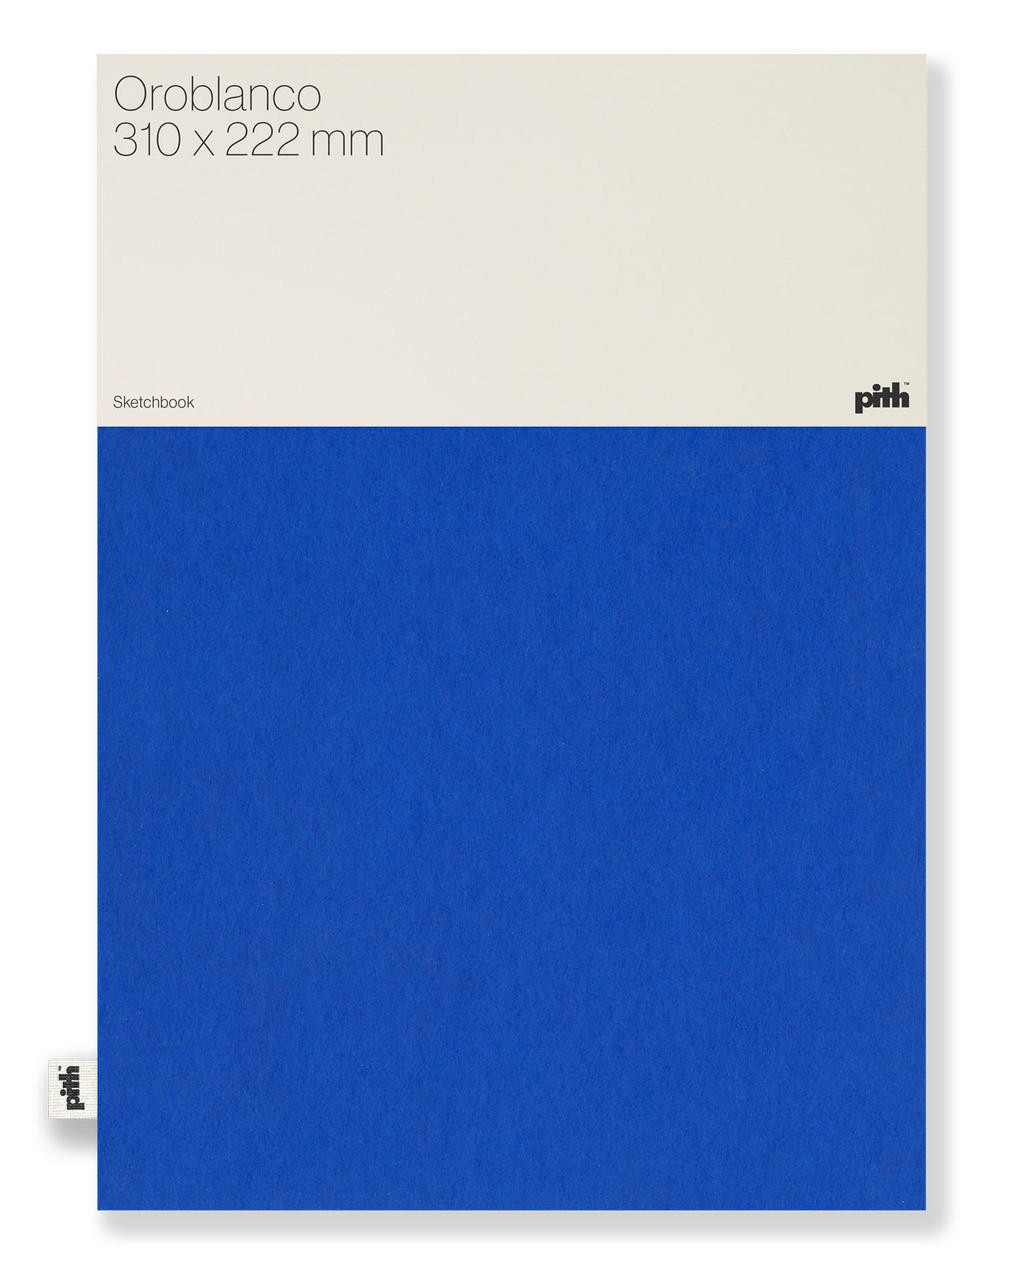 Pith Oroblanco Sketchbook 200gsm 76 Pages 310 X 222mm - Blue